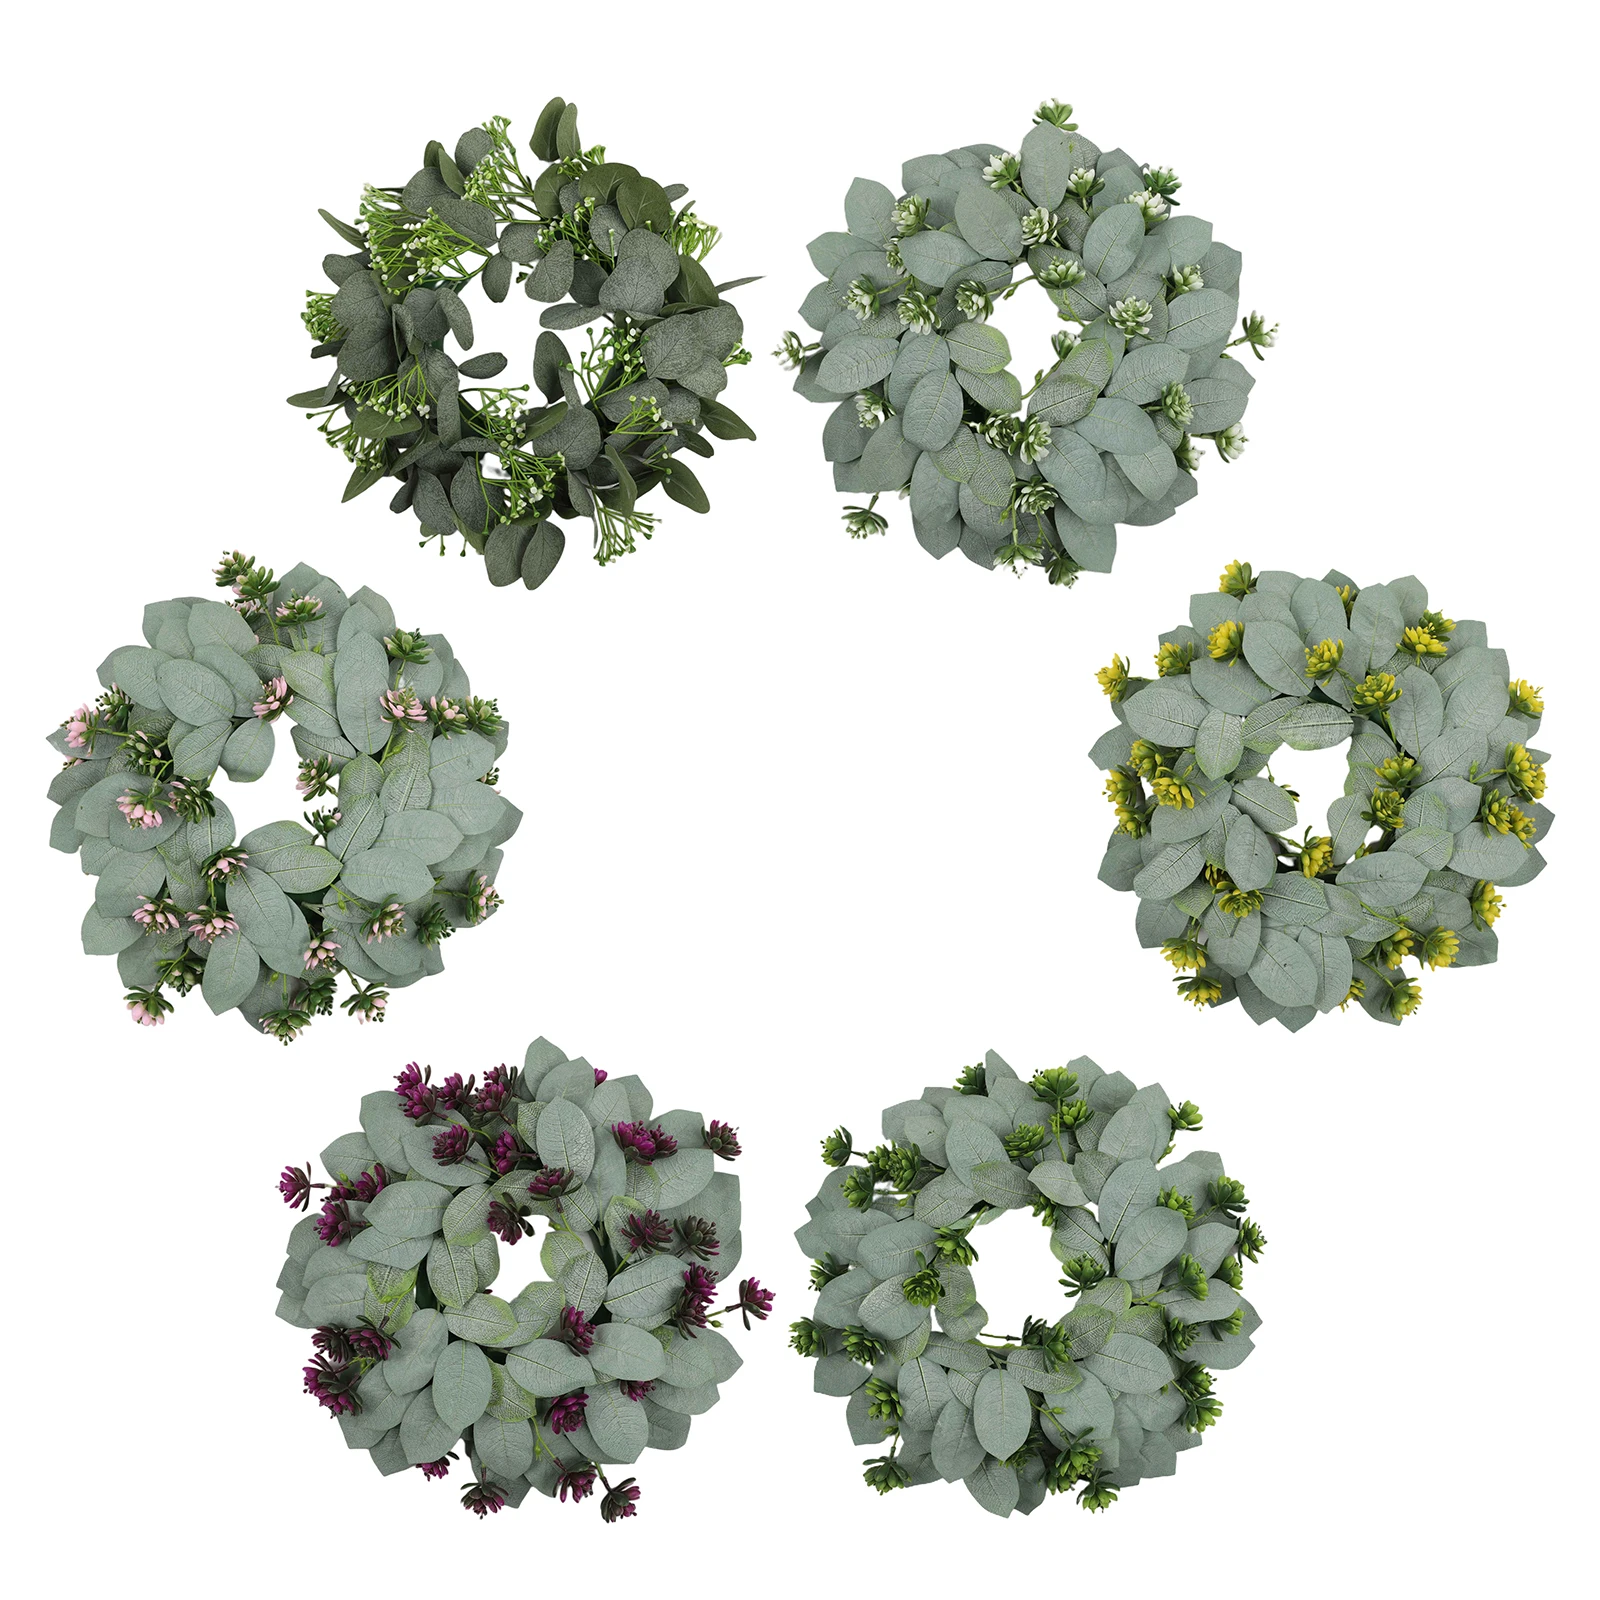 Leaves Eucalyptus Wreath Garland for Front Door ing Wedding Holiday Festival Celebration Decor Ornaments